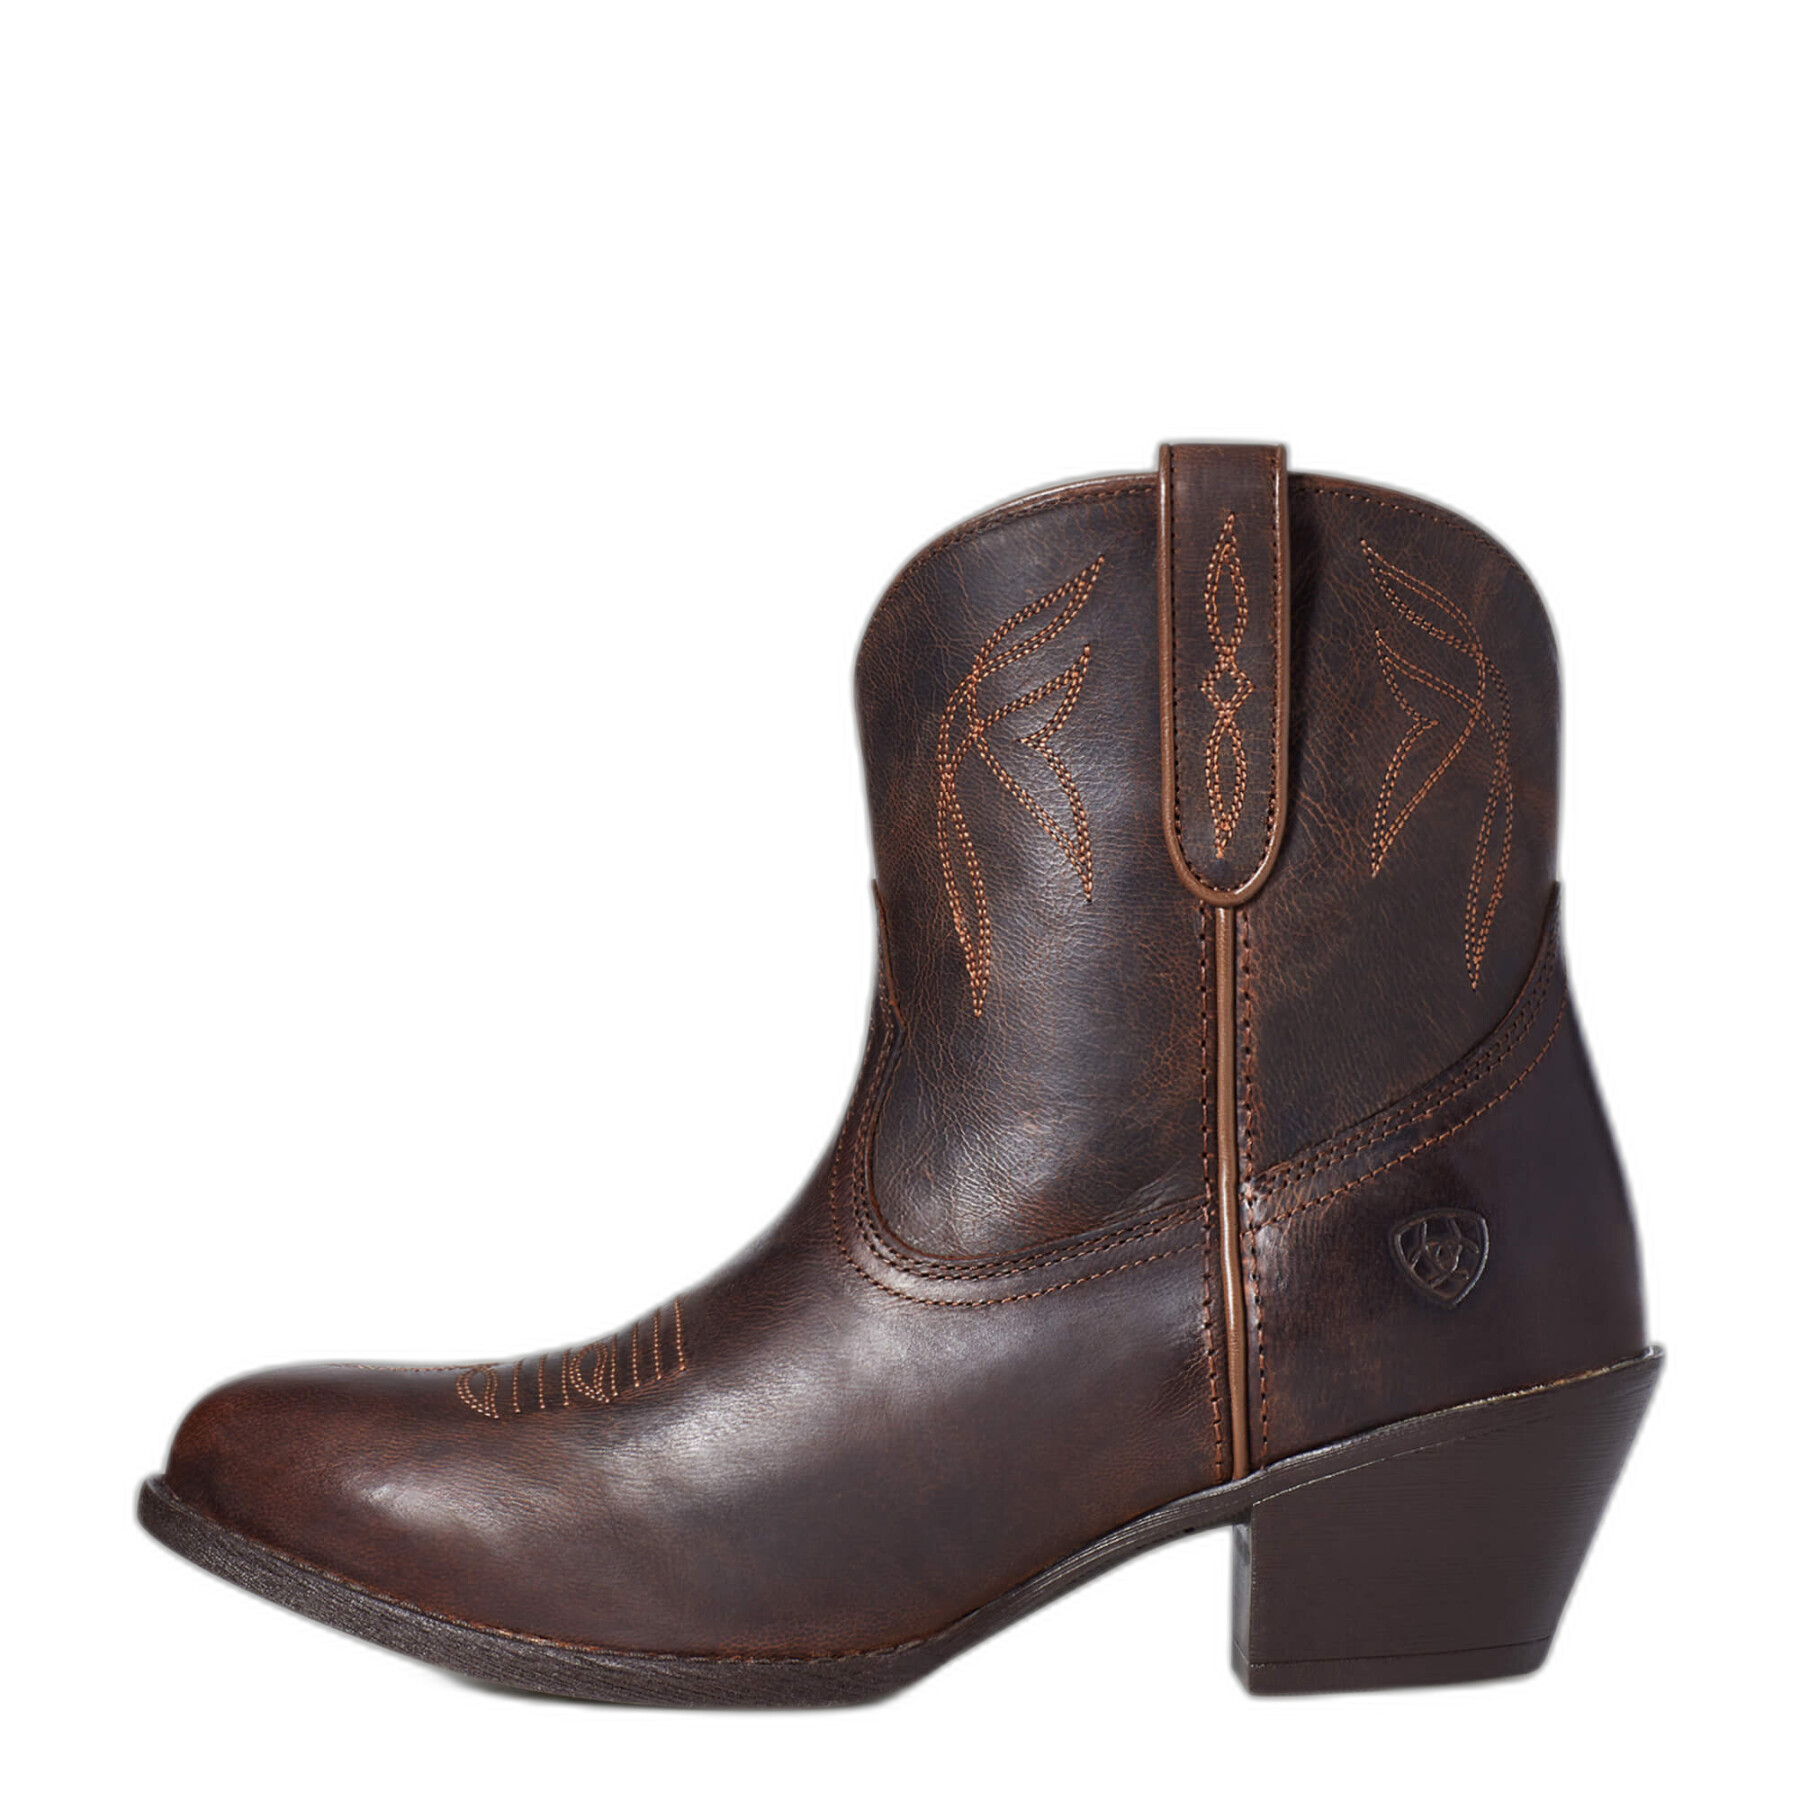 Women's leather western boots Ariat Darlin